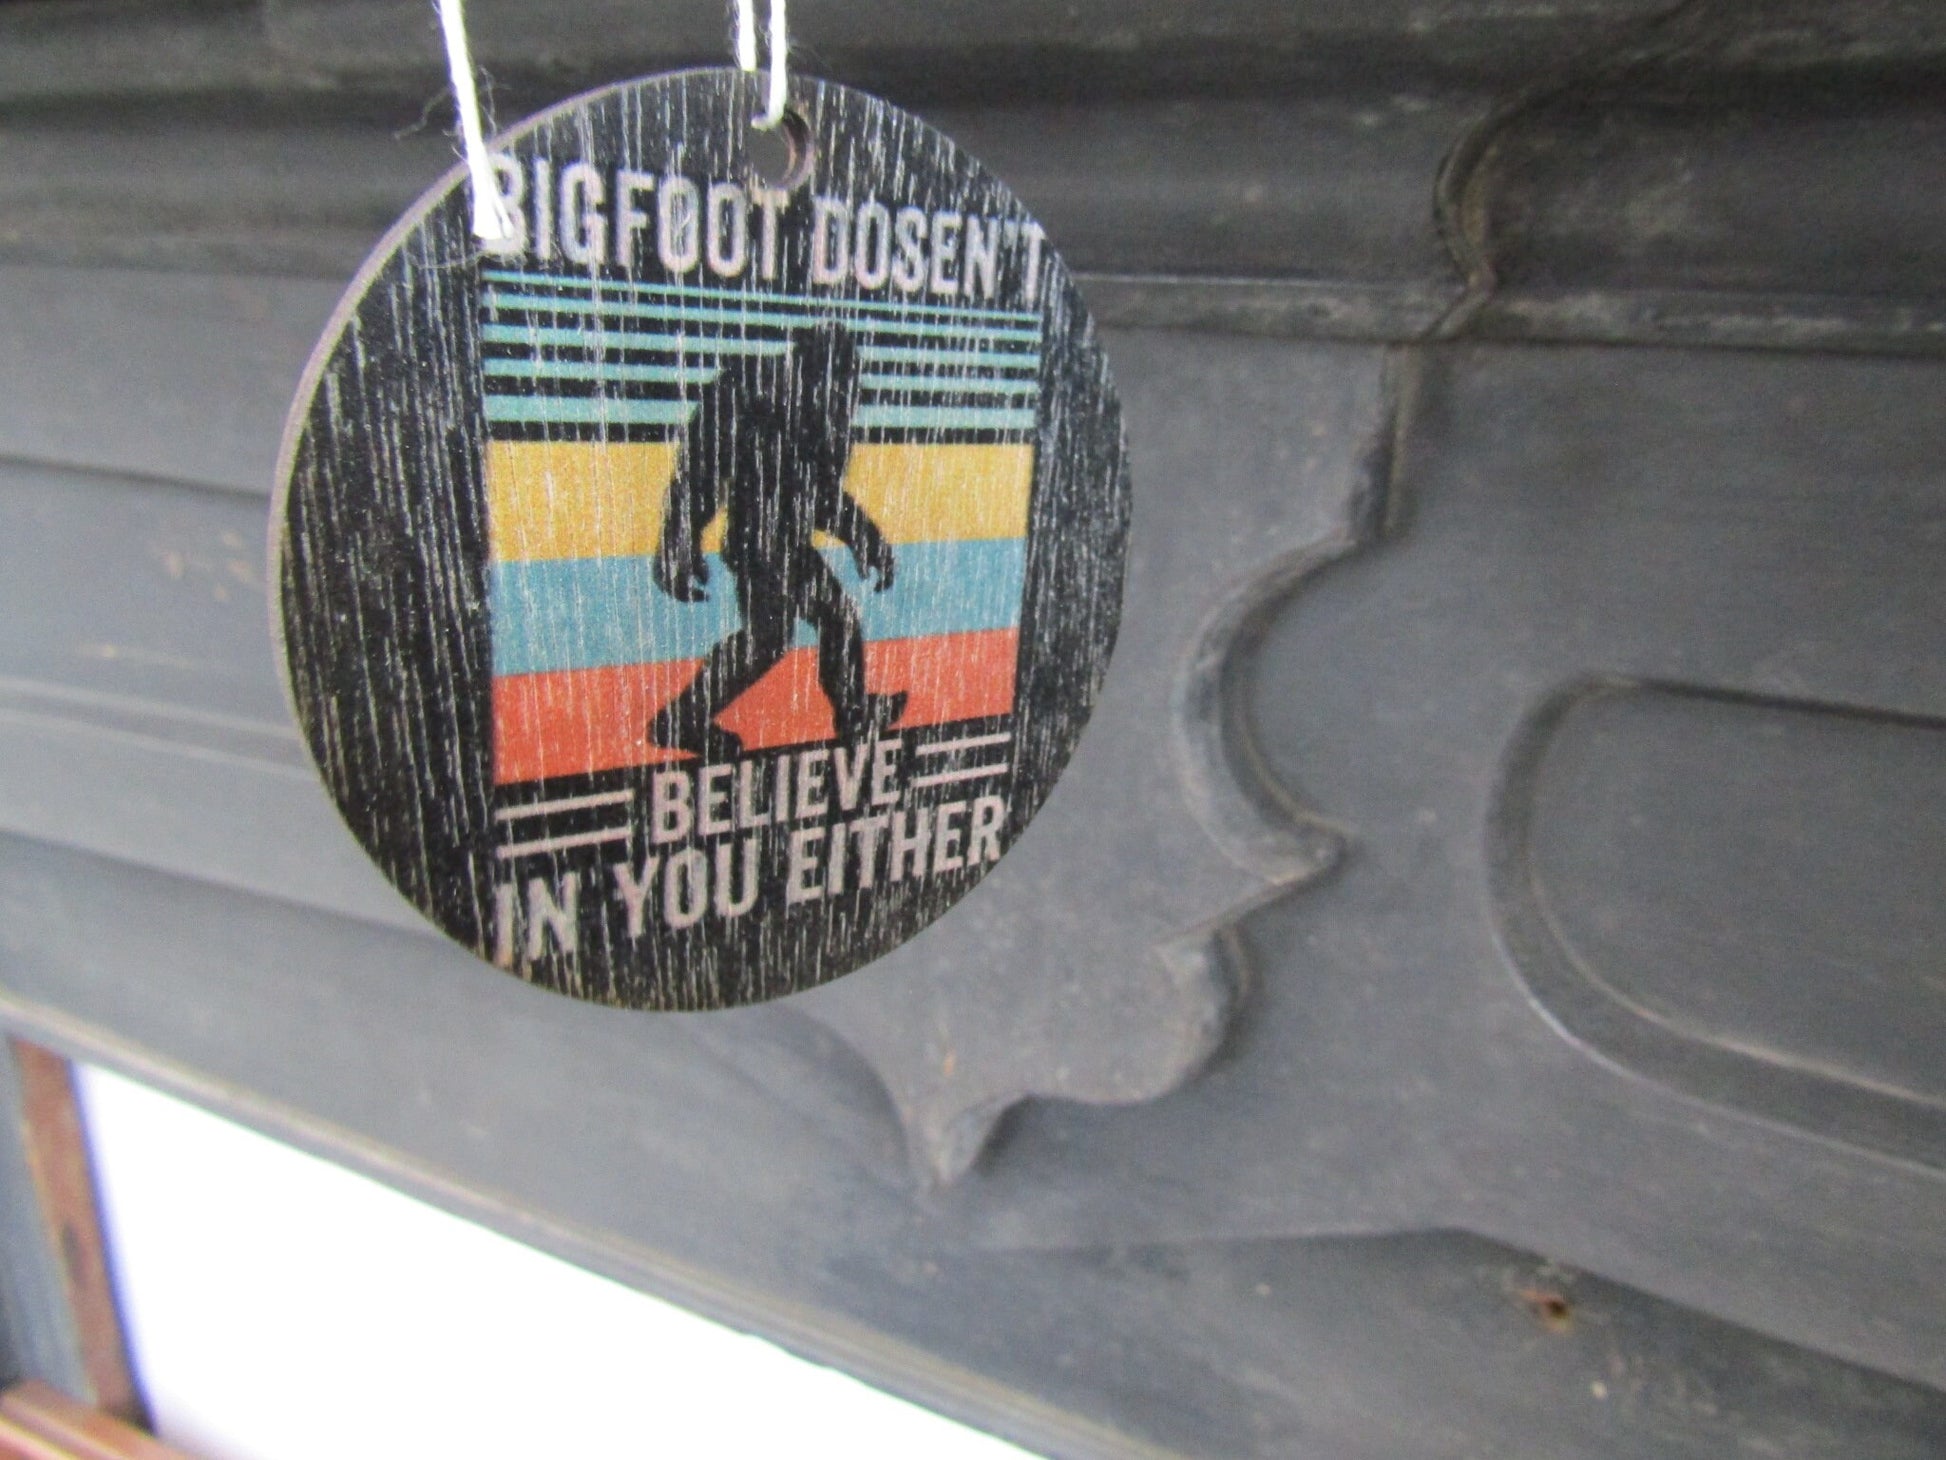 Sasquatch Bigfoot Doesnt Believe In You Set Of 6 Ornaments Wooden Printed Color Keychain Car Mirror Retro Hiking Hide and Seek Champion Myth